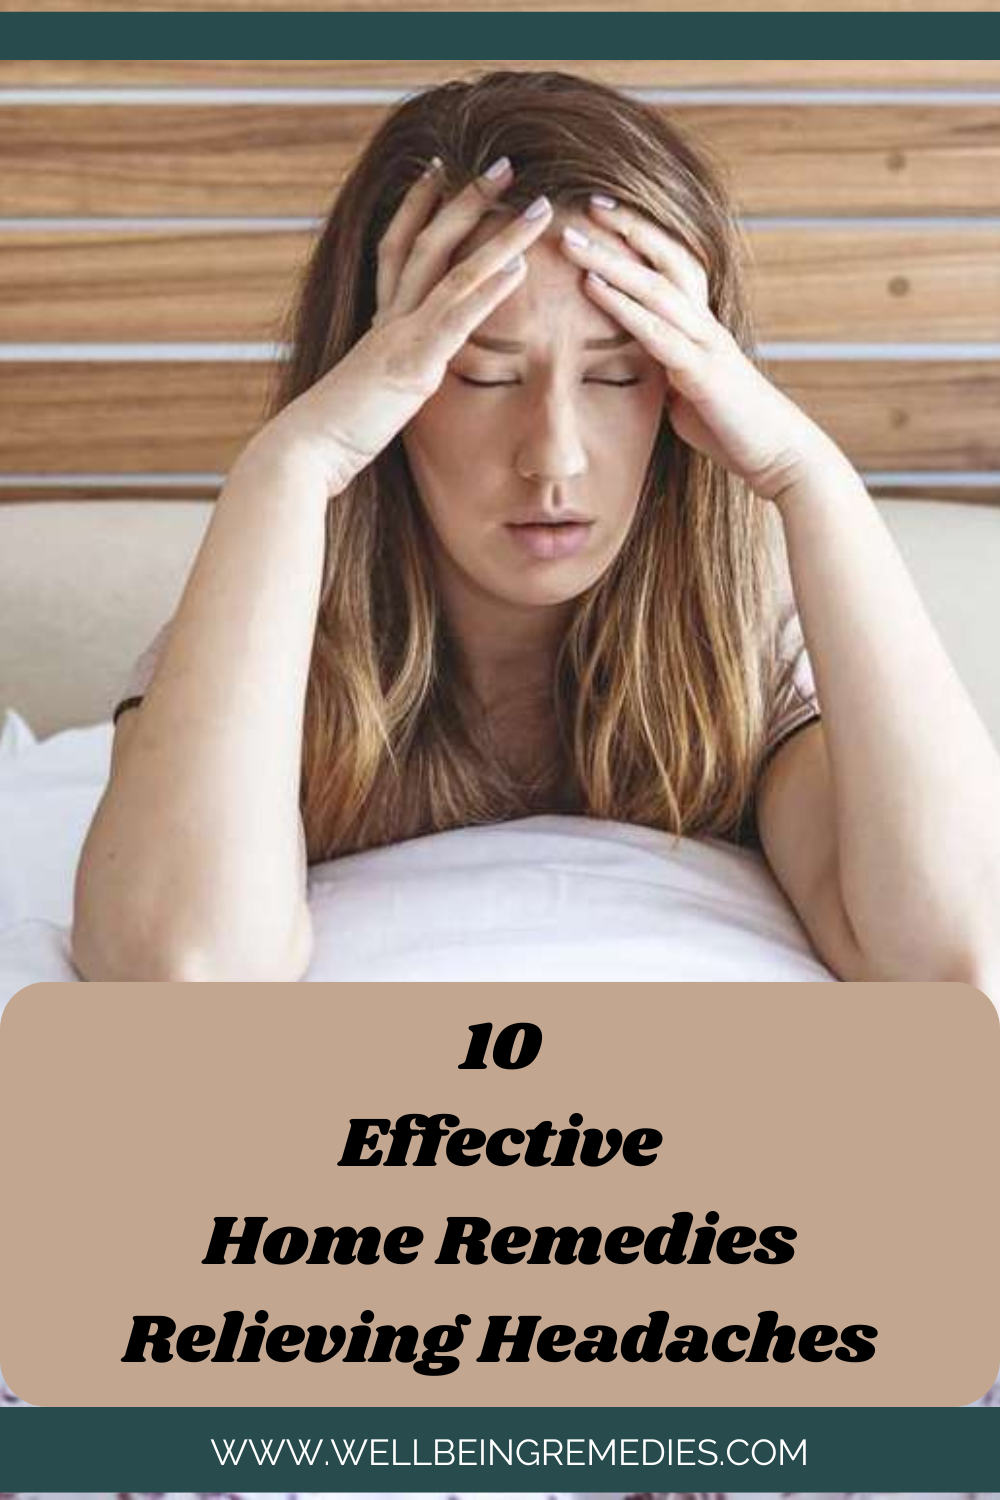 10 Effective Home Remedies for Relieving Headaches